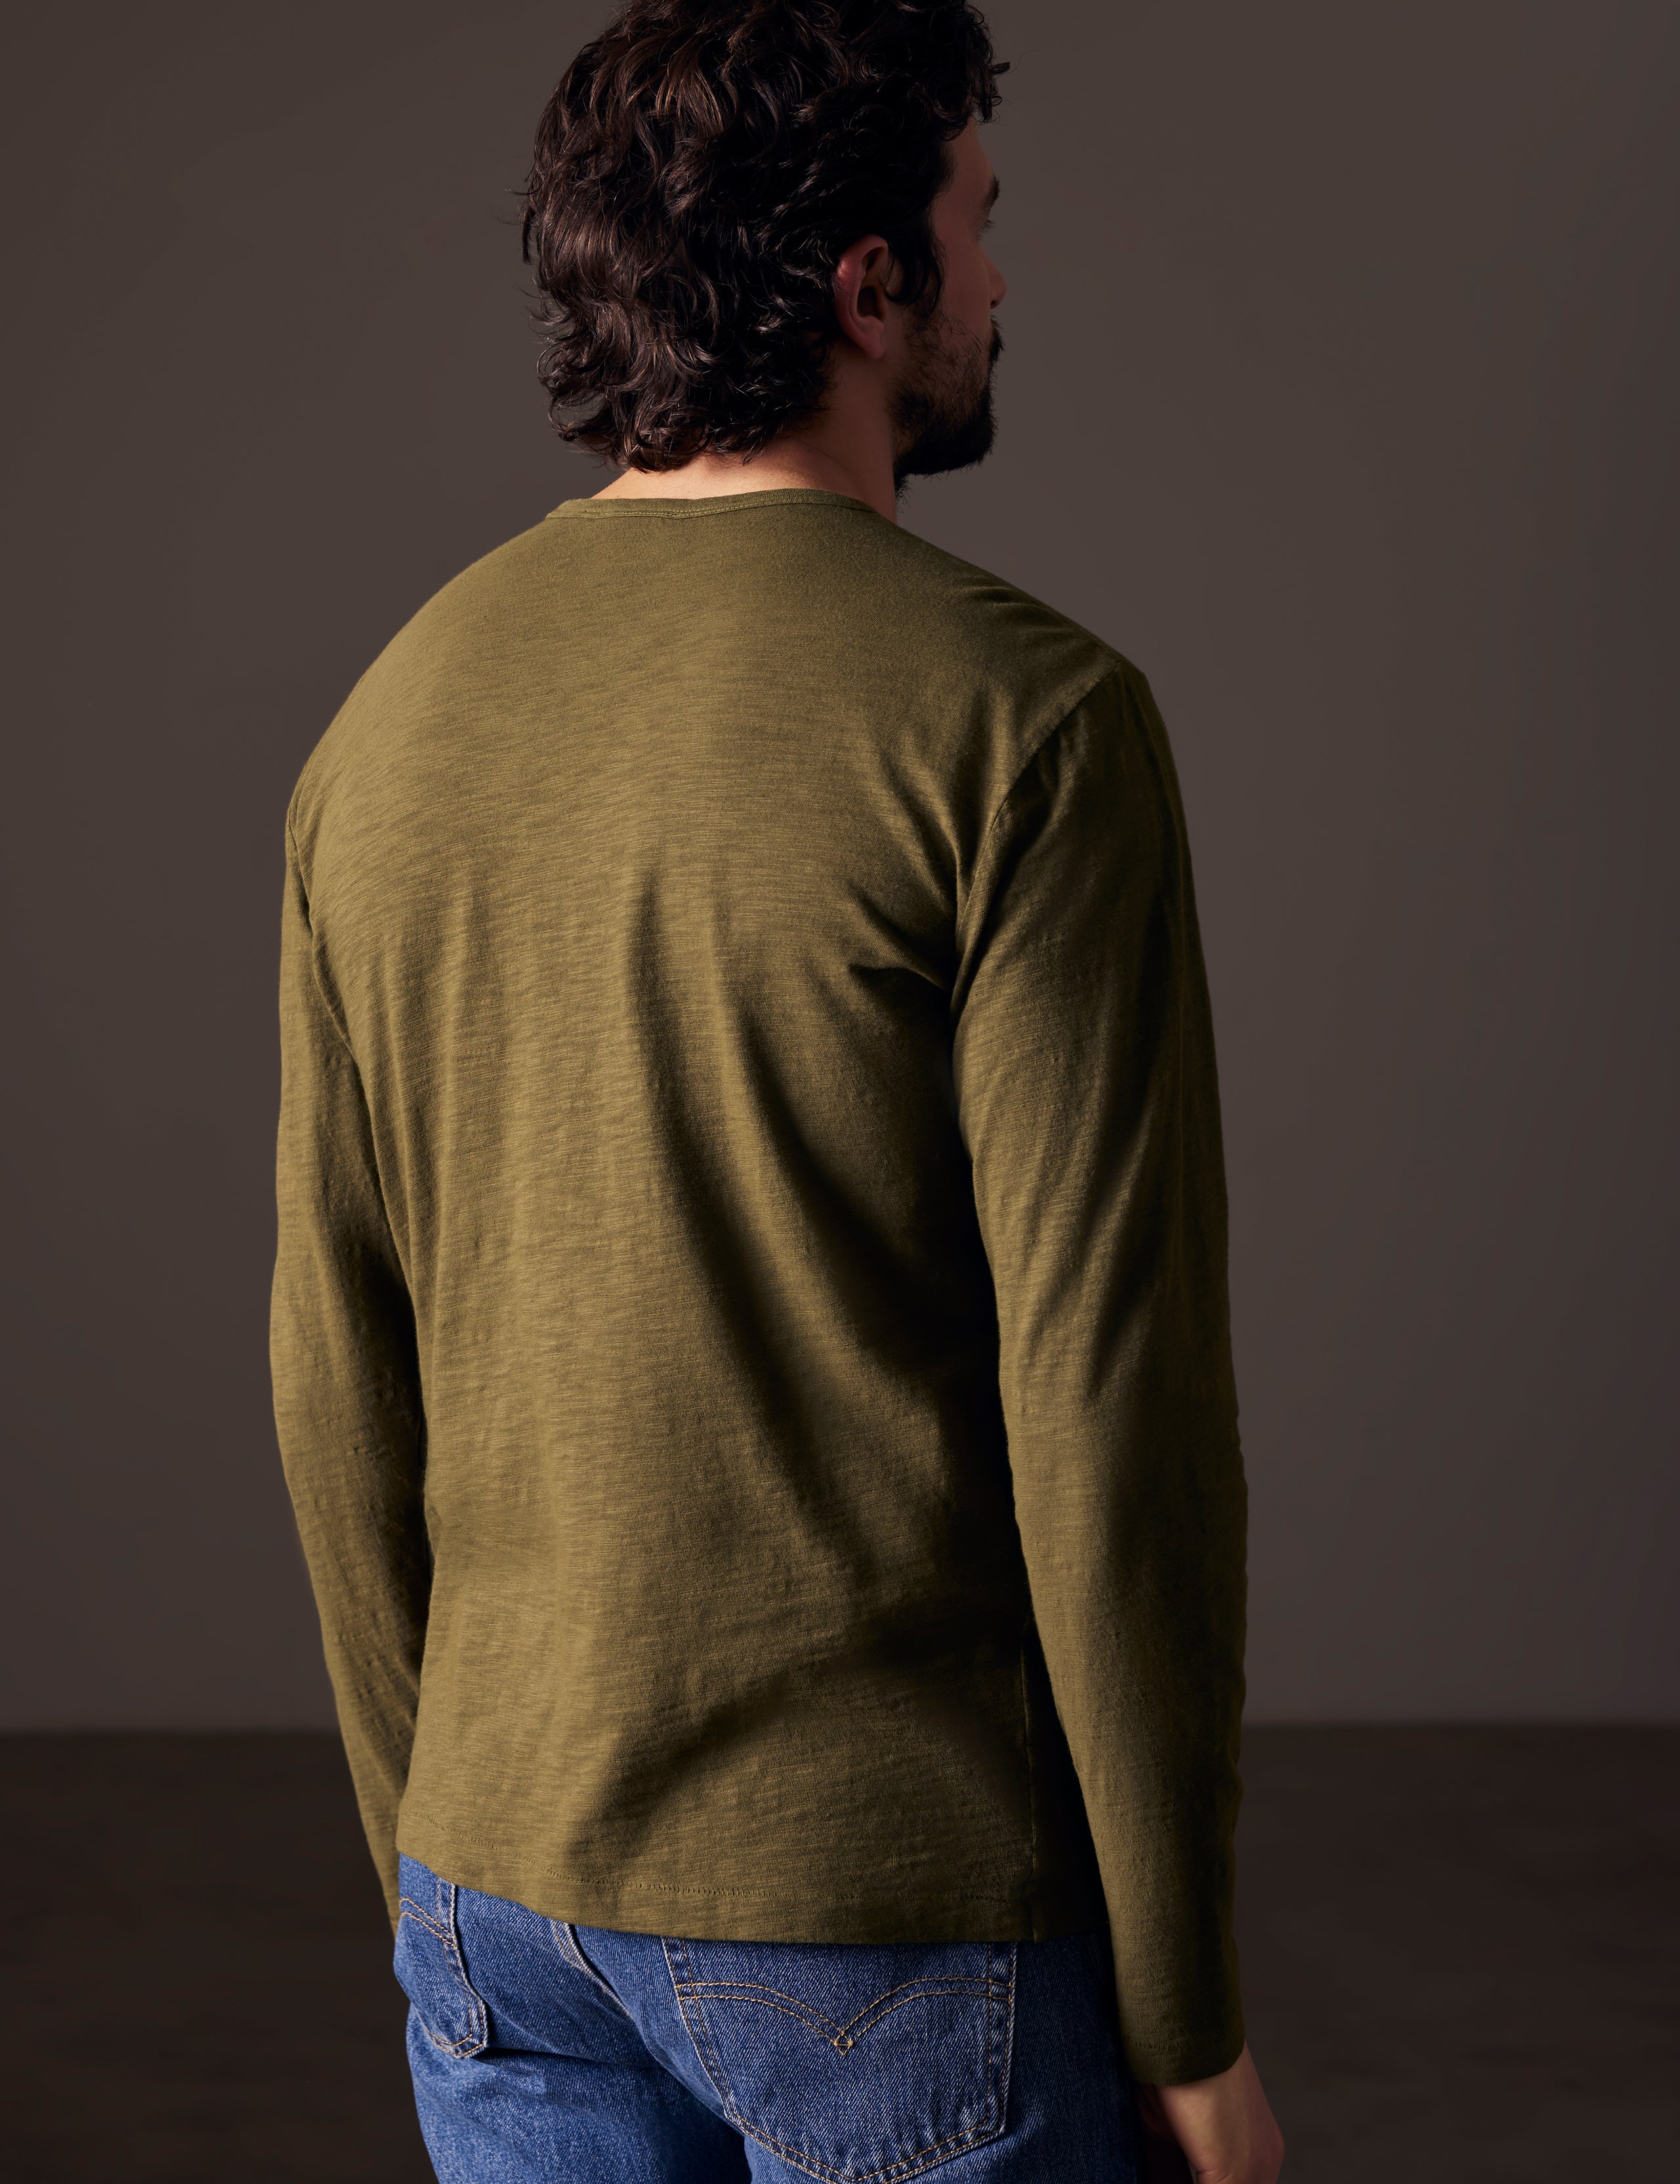 back view of man wearing green long-sleeve tee from AETHER Apparel